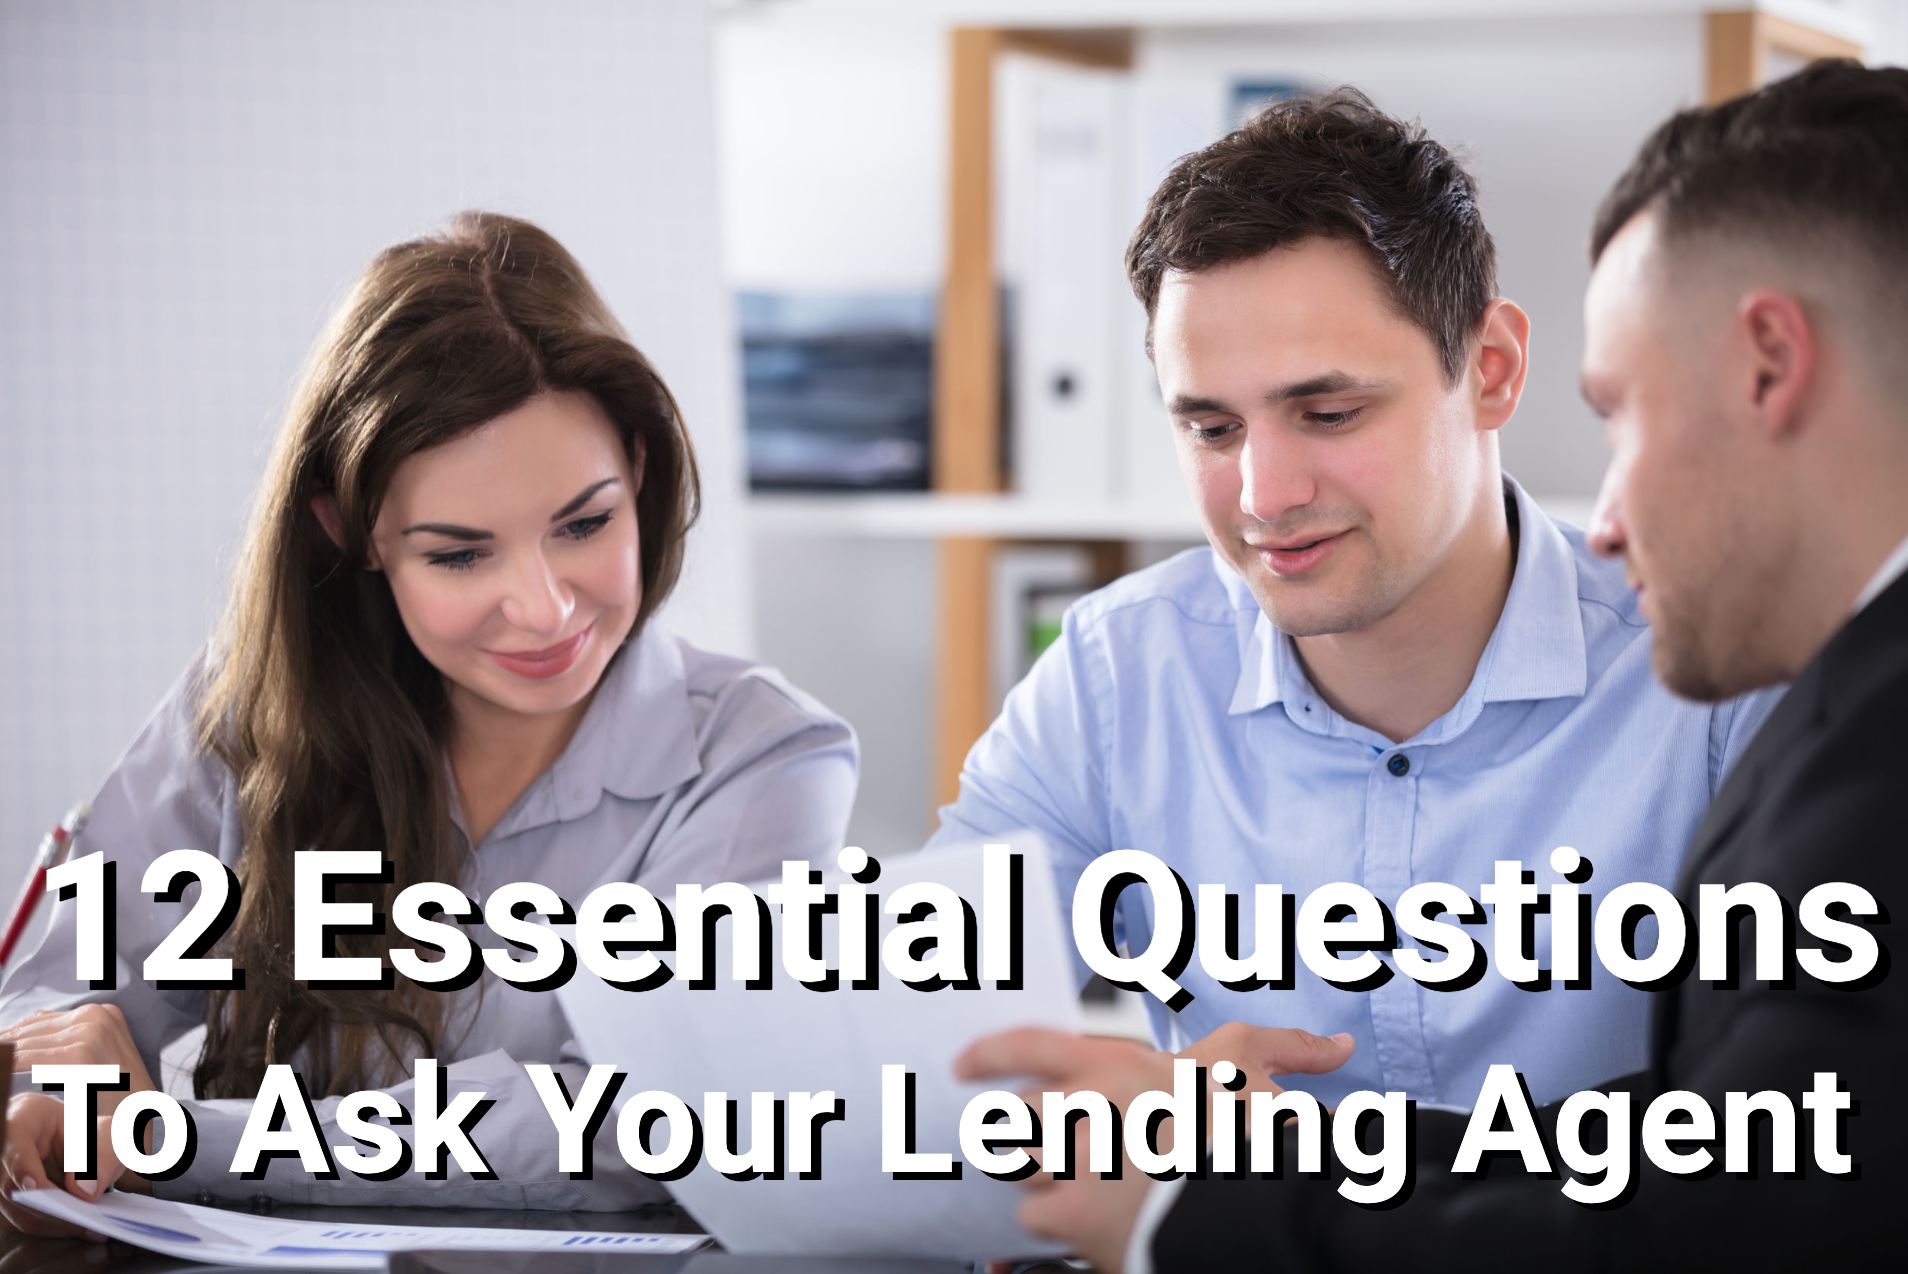 Couple talking with lending agent